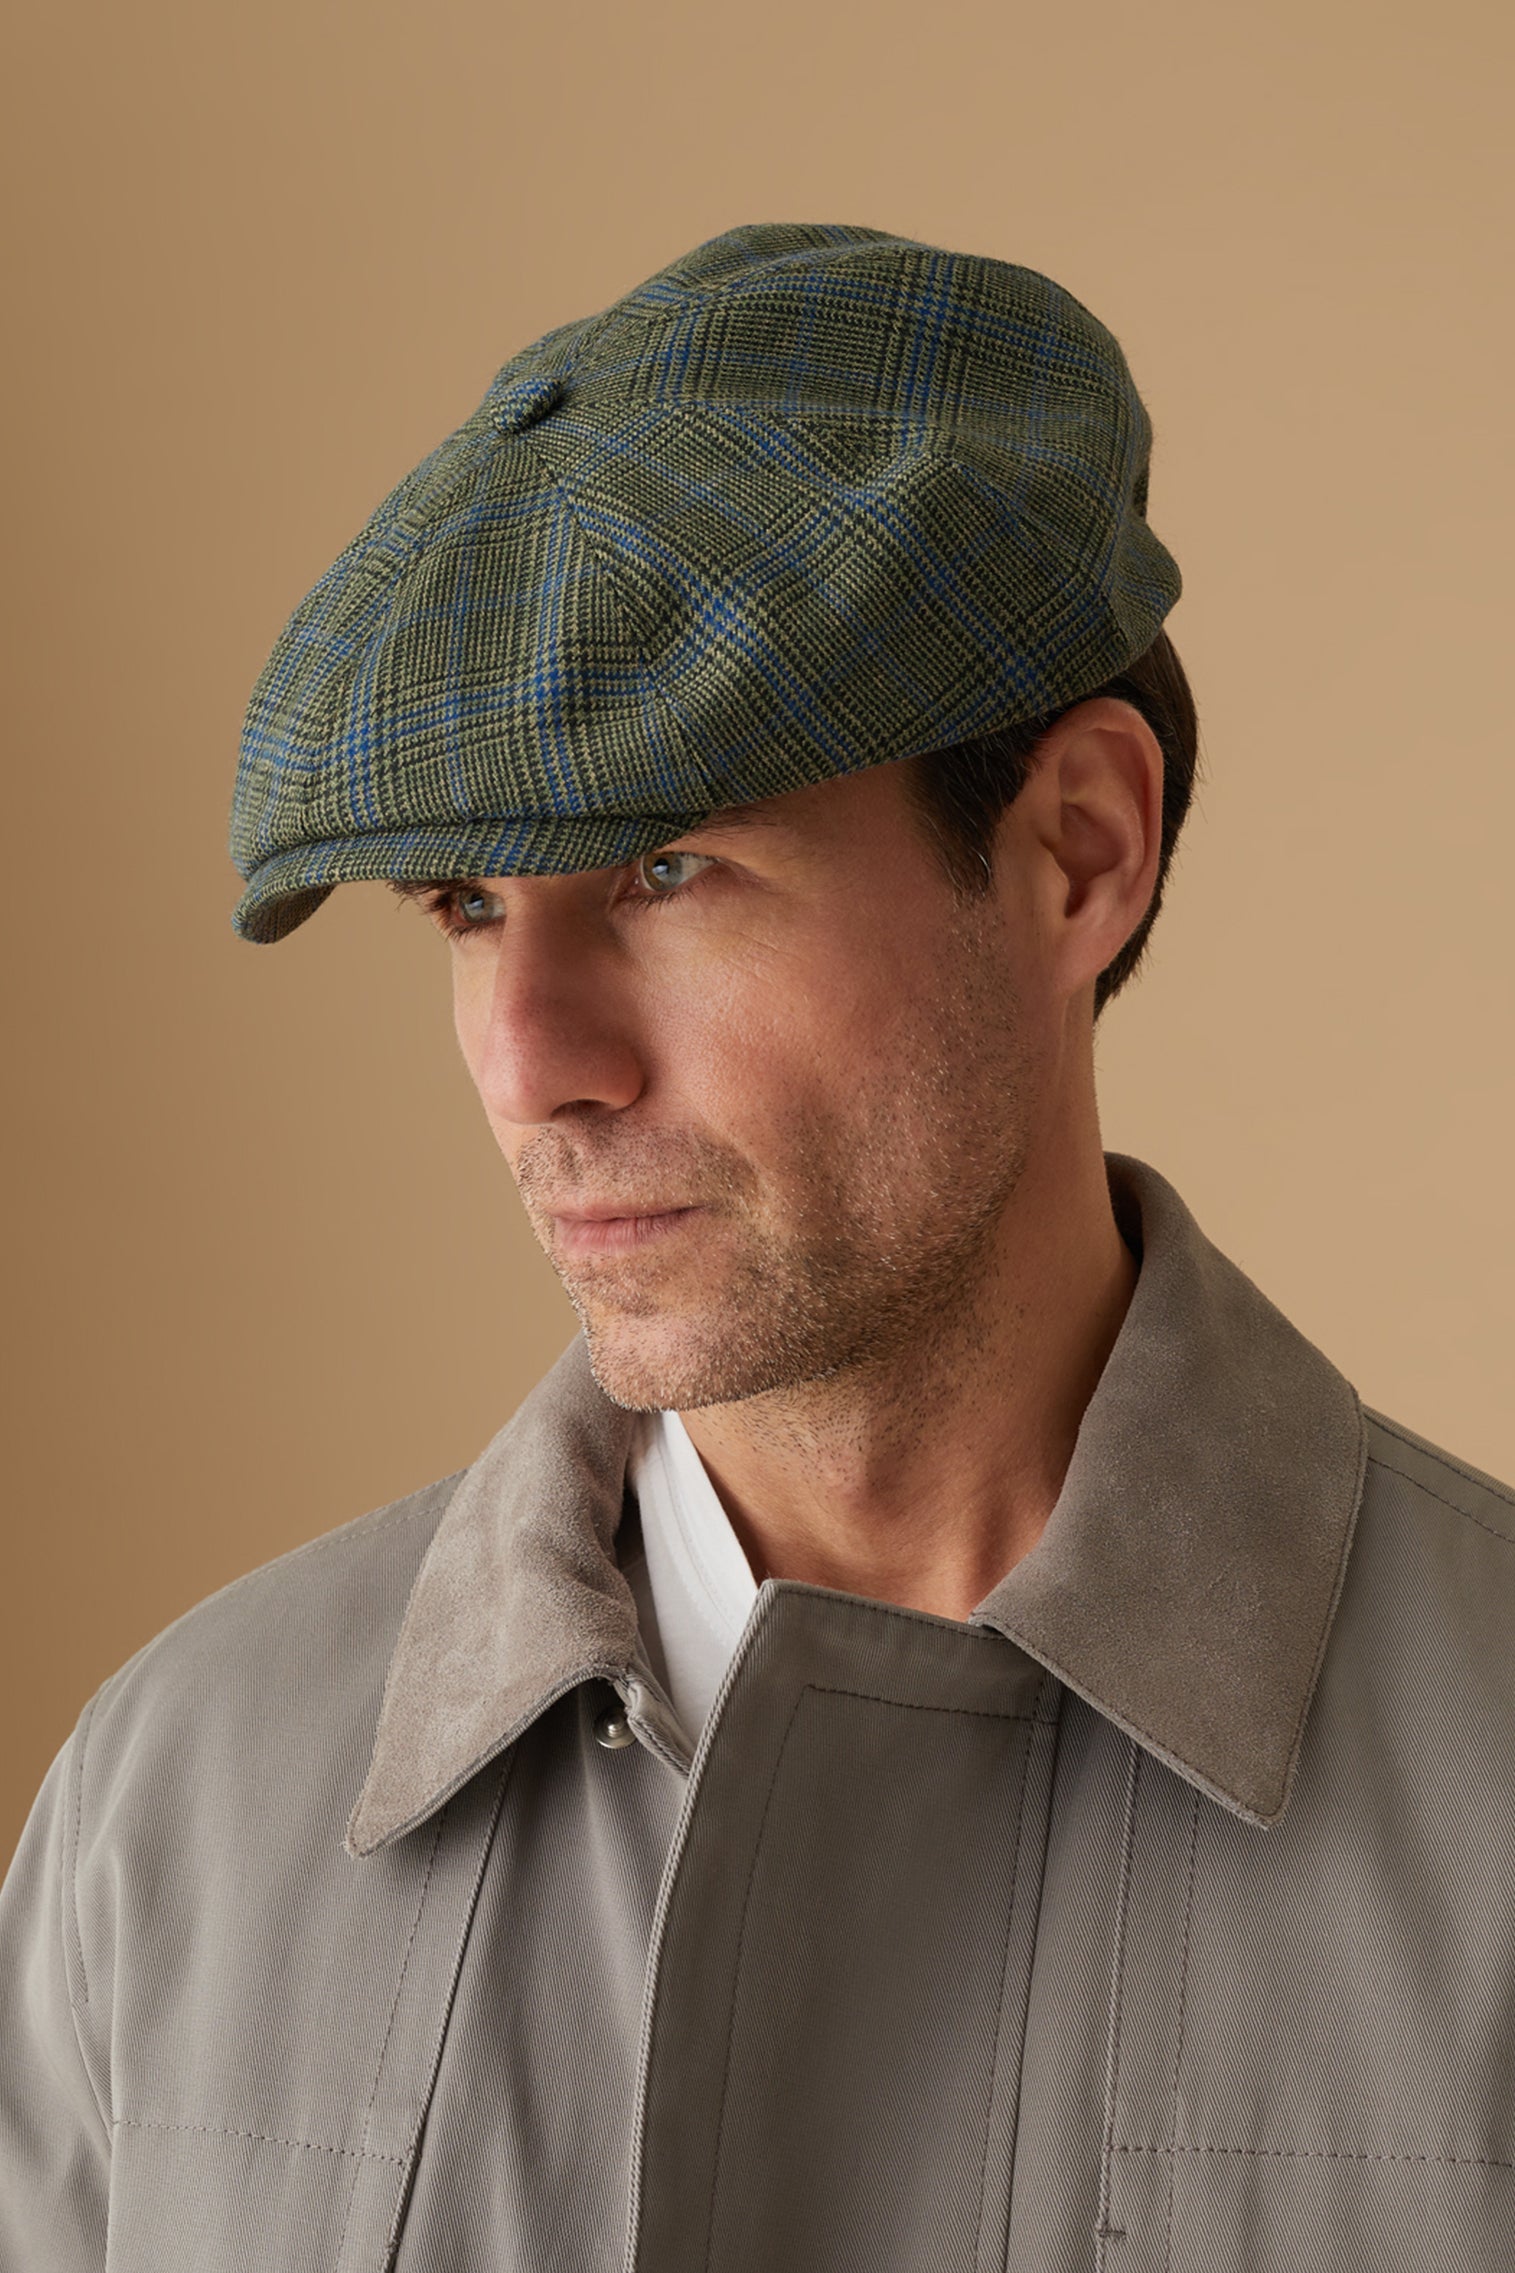 Highgrove Green Bakerboy Cap - Limited Edition Collection - Lock & Co. Hatters London UK